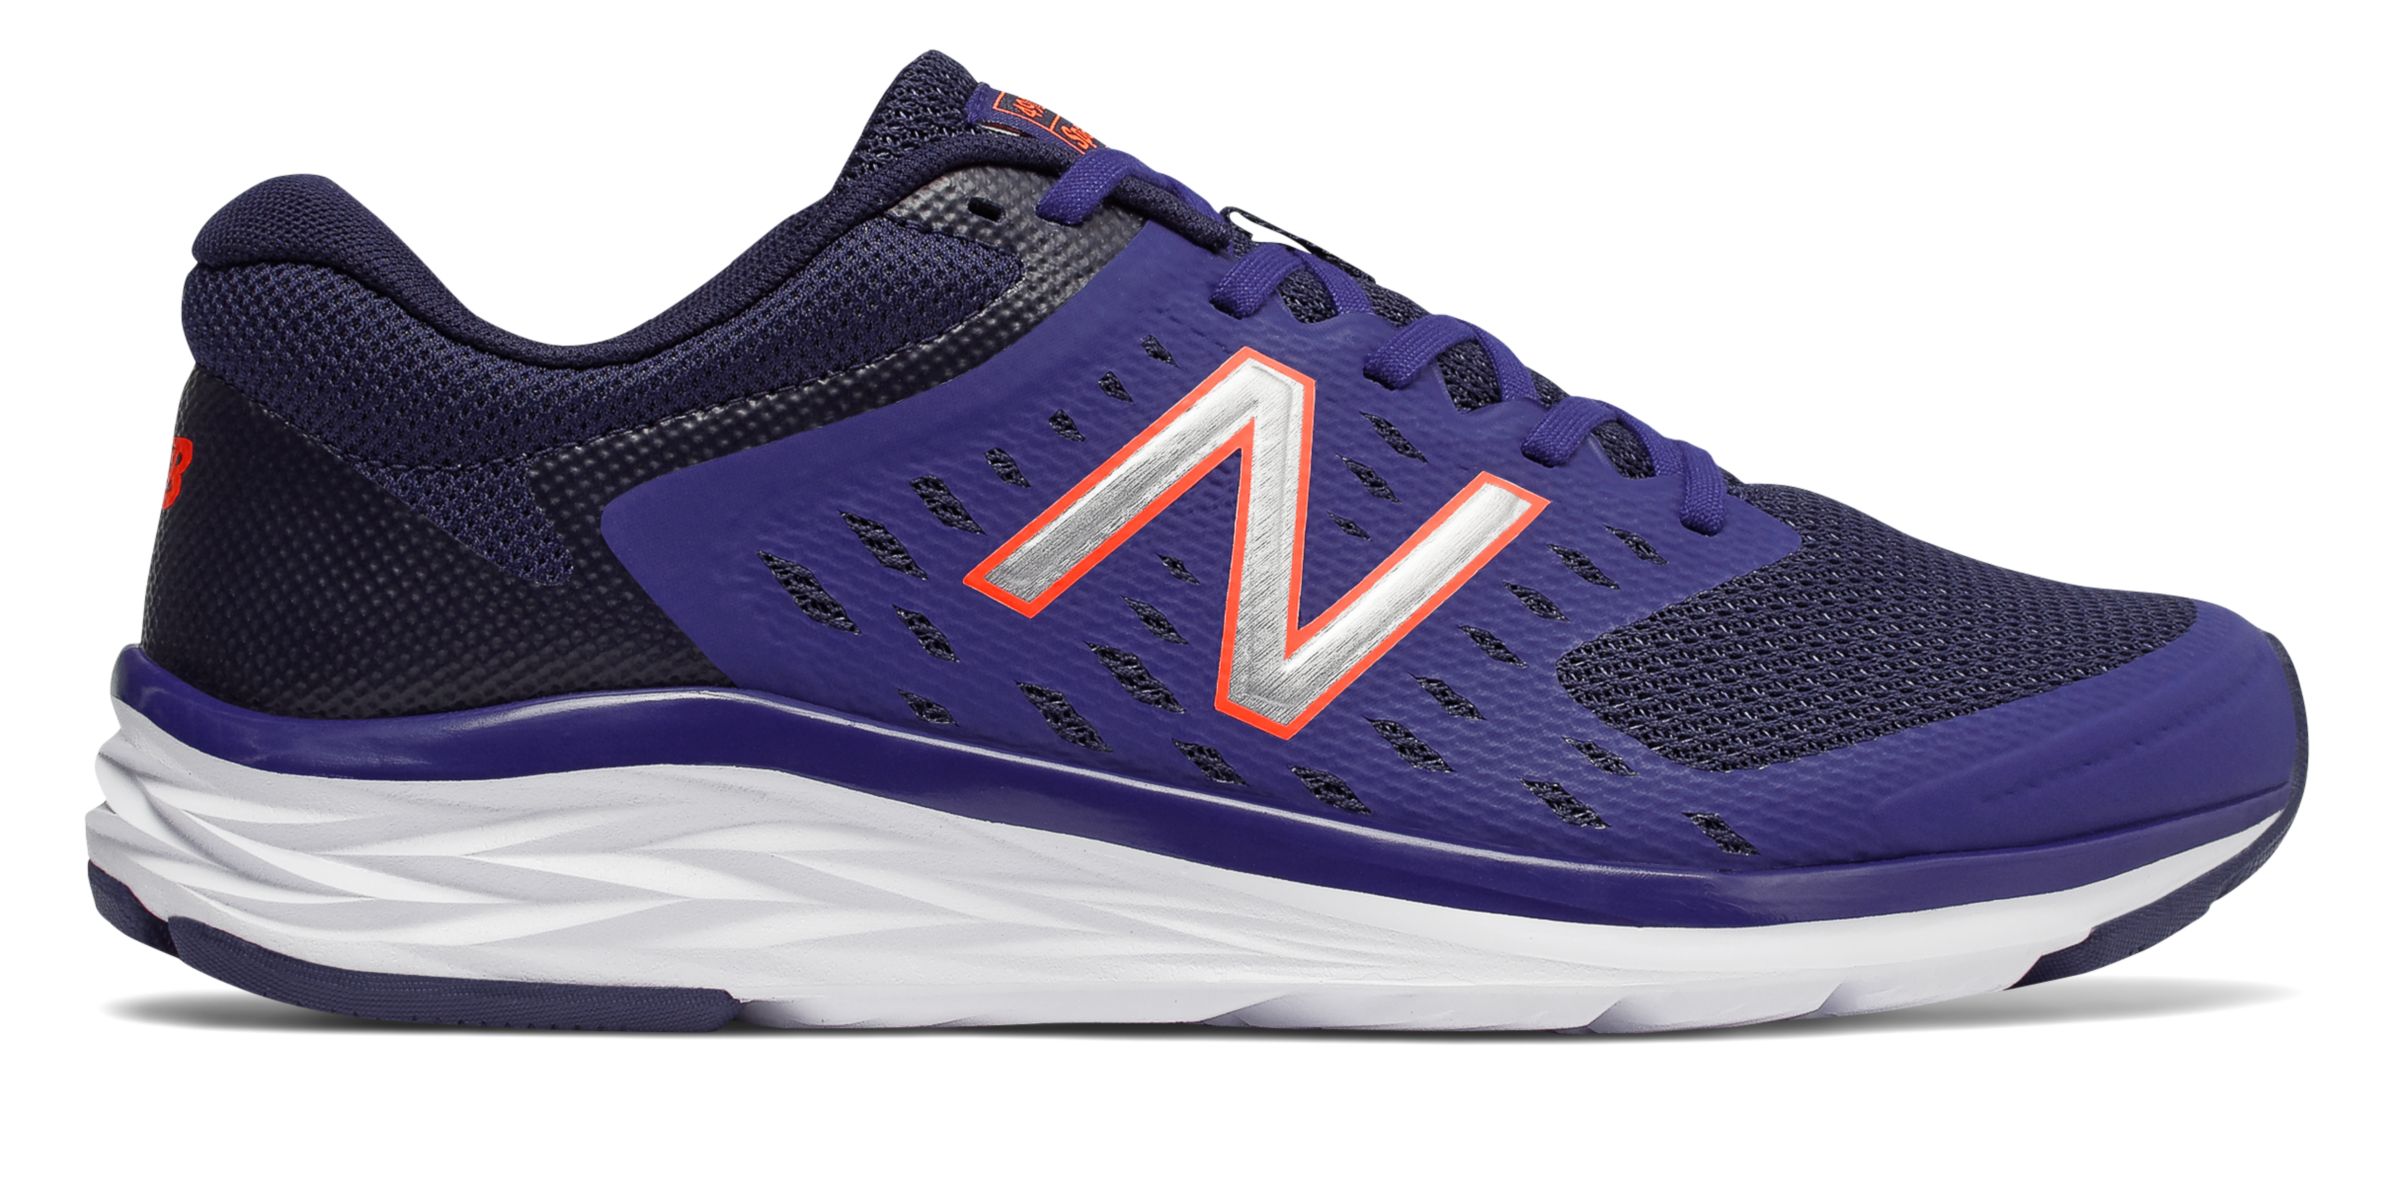 New Balance M490-V5 on Sale - Discounts Up to 54% Off on M490CP5 at Joe's New  Balance Outlet